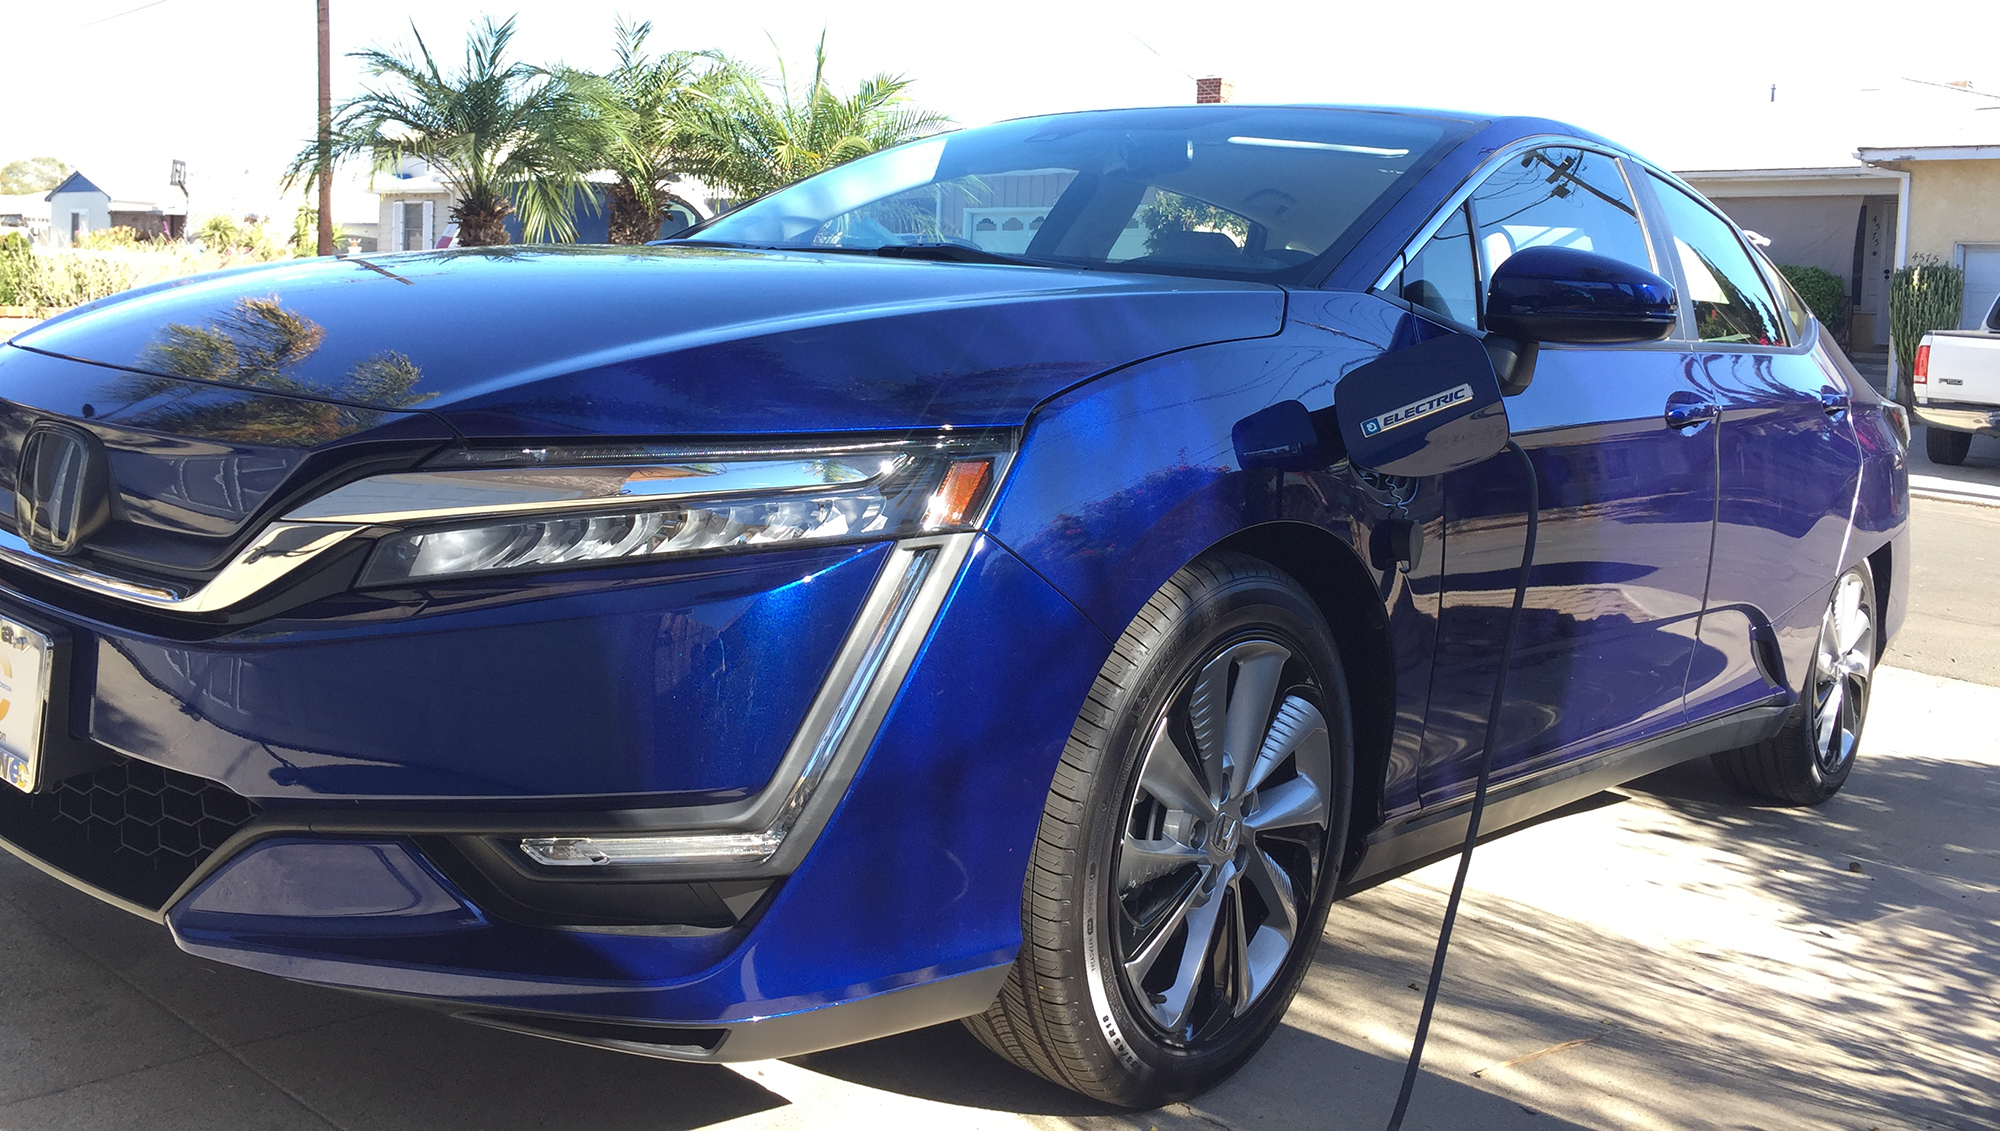 It’s electric – Our new car, the Honda Clarity